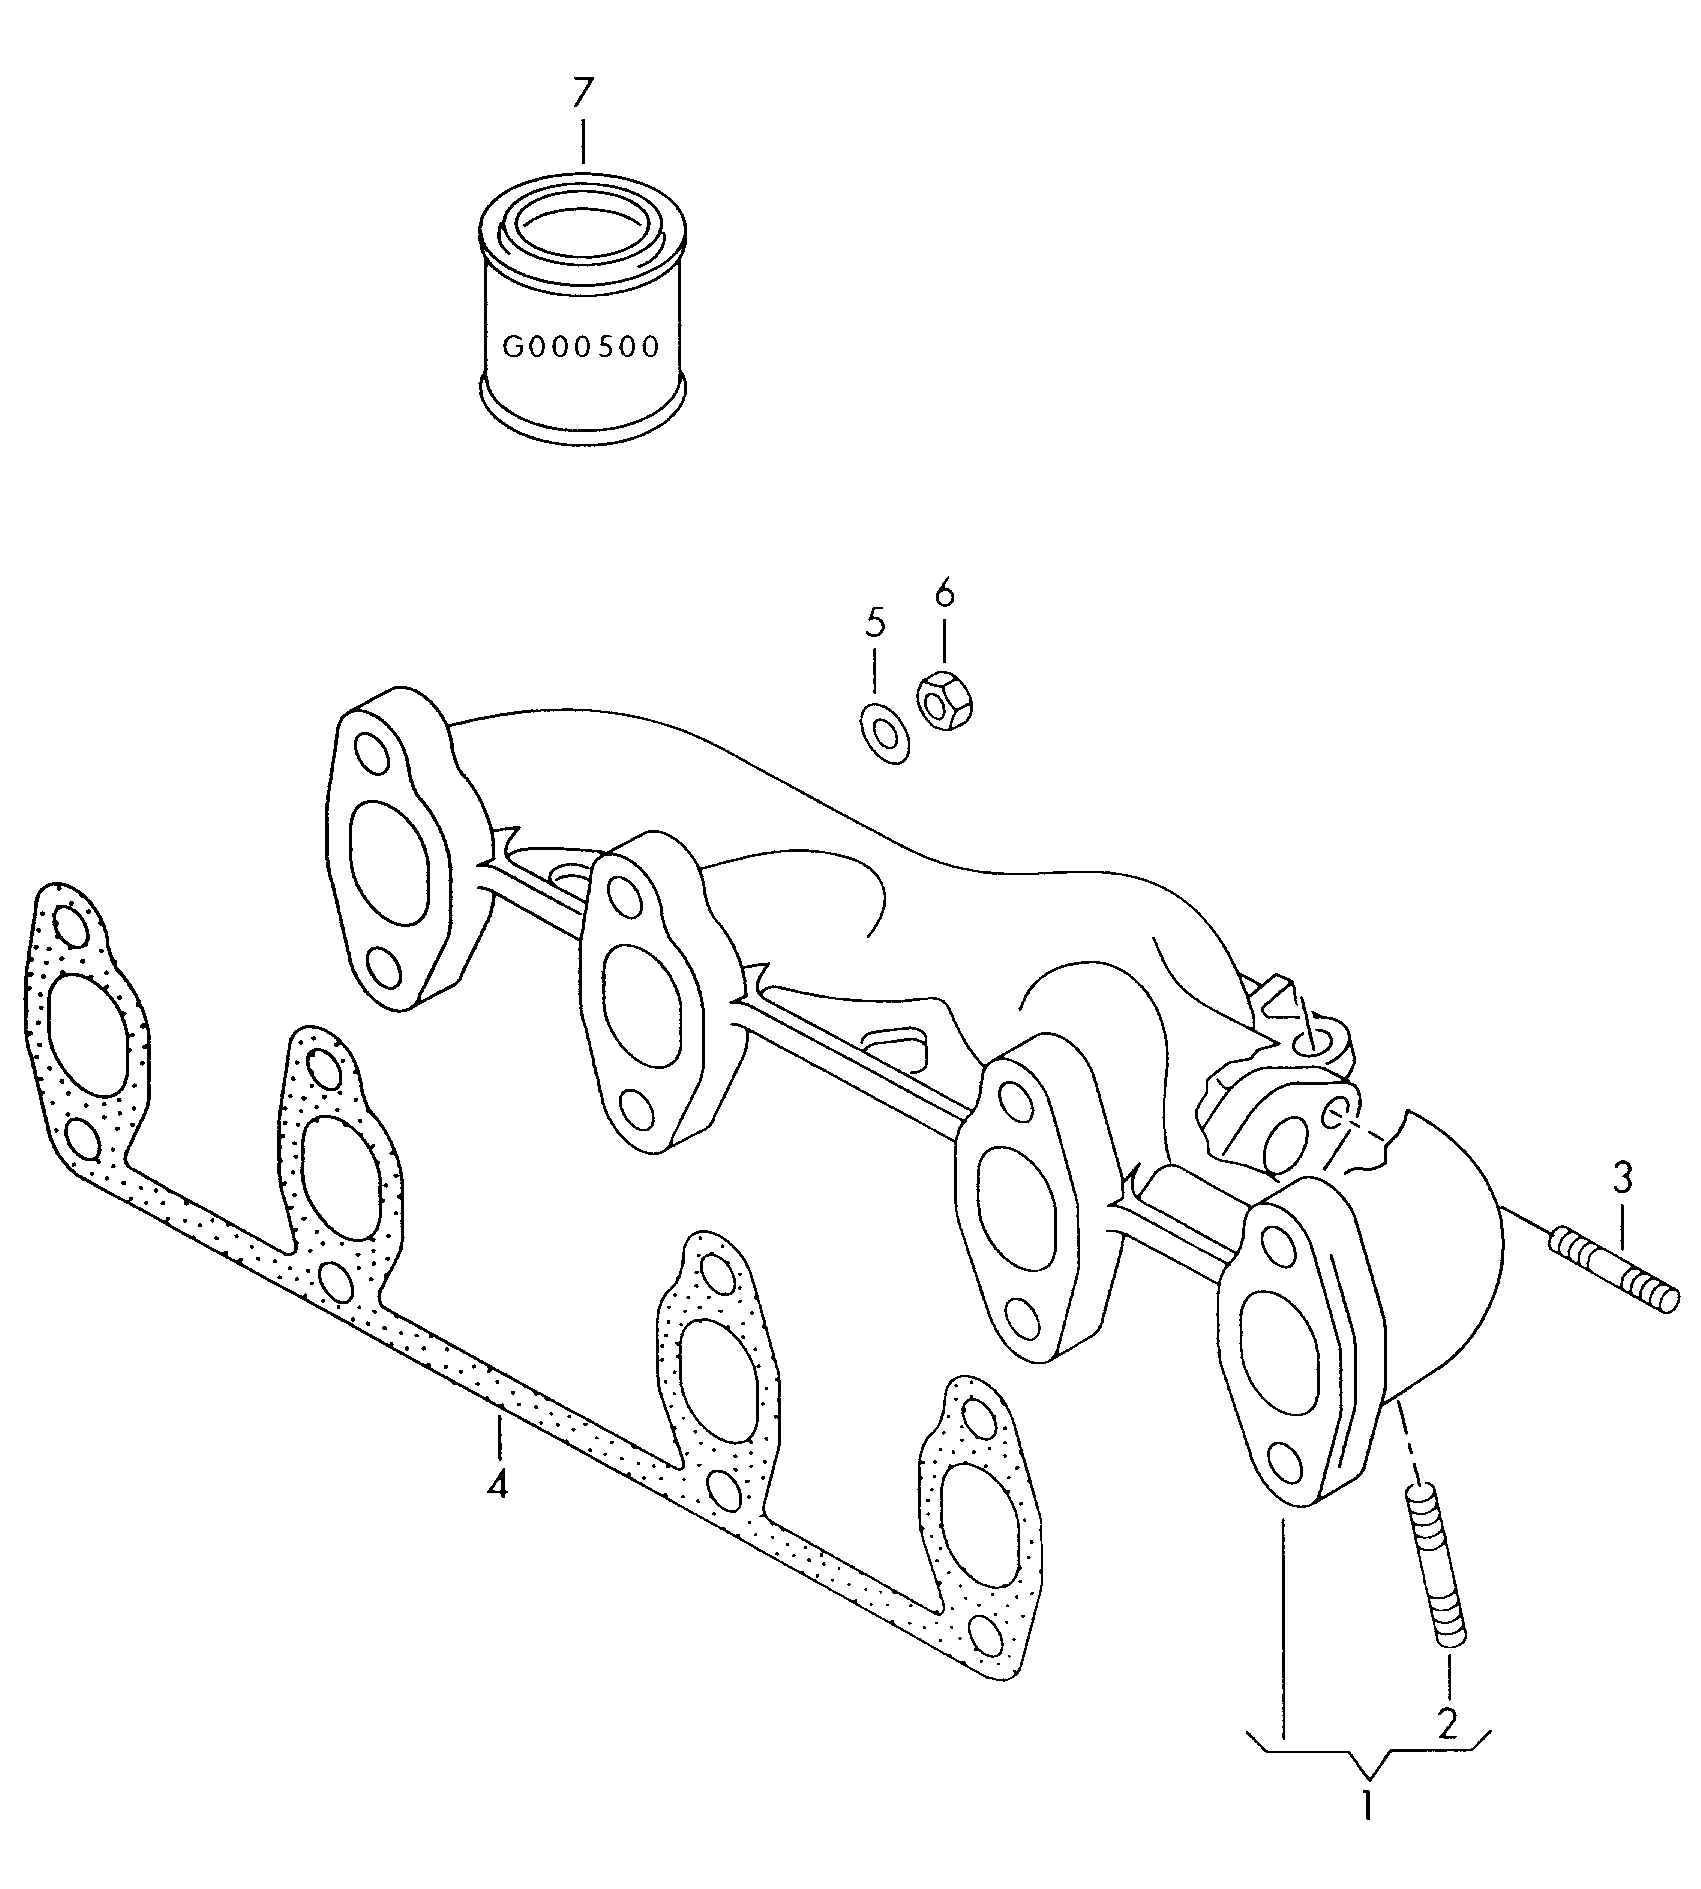 Exhaust manifoldsExhaust manifold with turbo-<br>charger             see illustration: 1.9ltr.<br> 145-040 - Fabia - fab